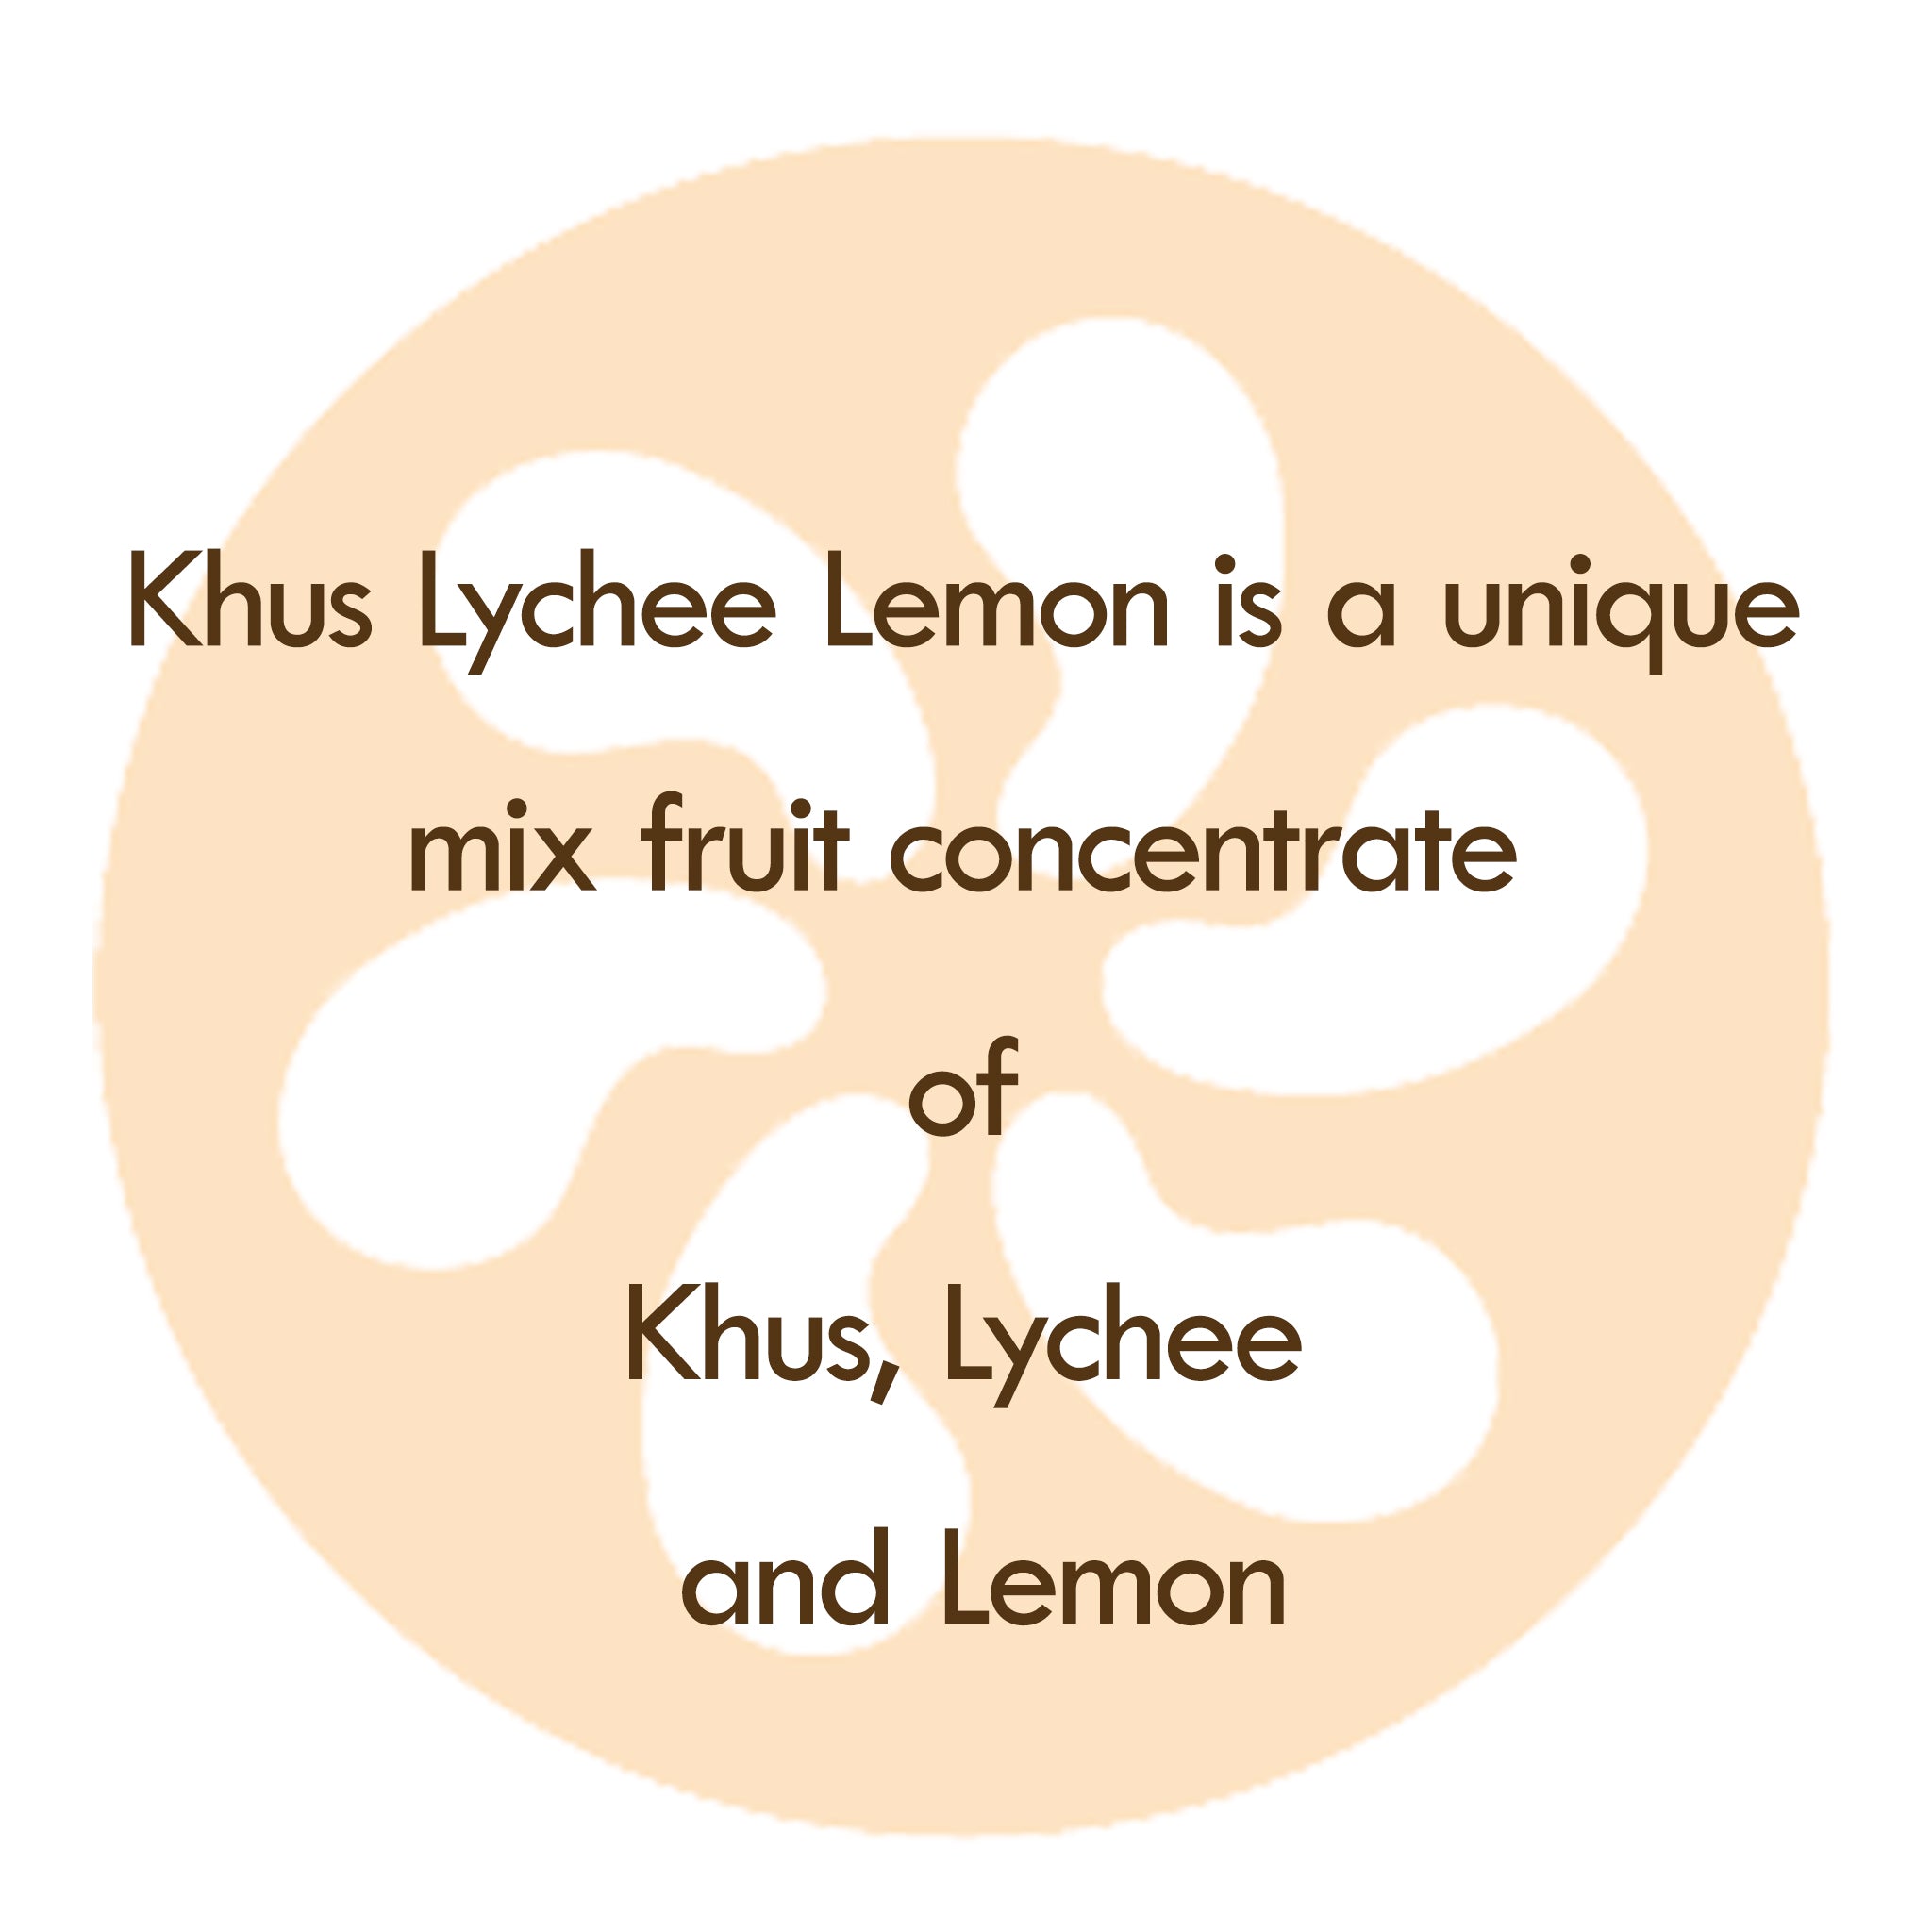 Our Khas Lychee Lemon is a concentrate of Khas, Lychee and Lemon